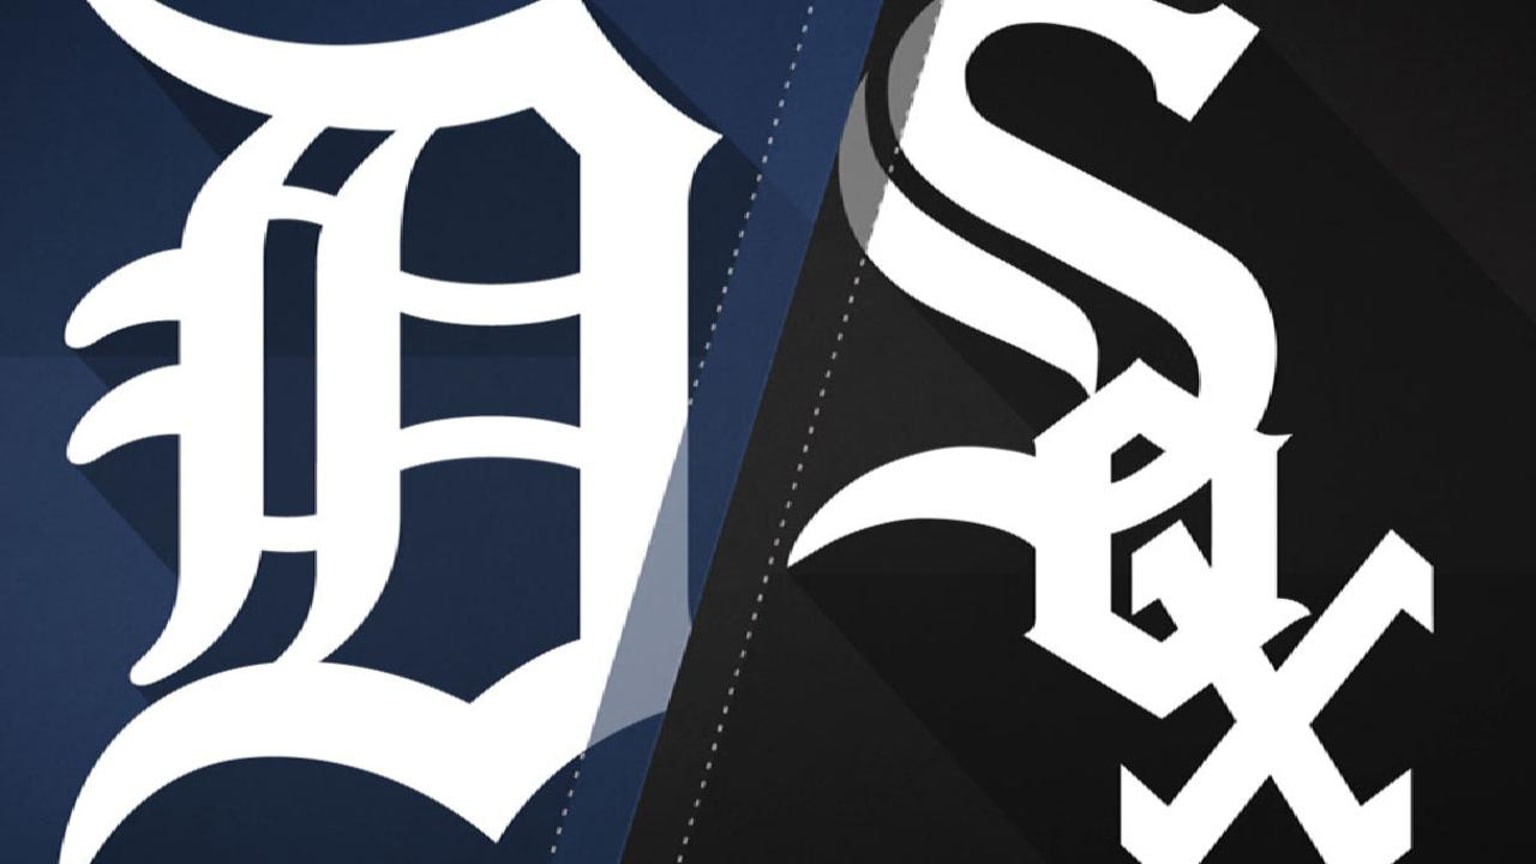 White Sox 3, Tigers 0: Offense goes home early - Bless You Boys